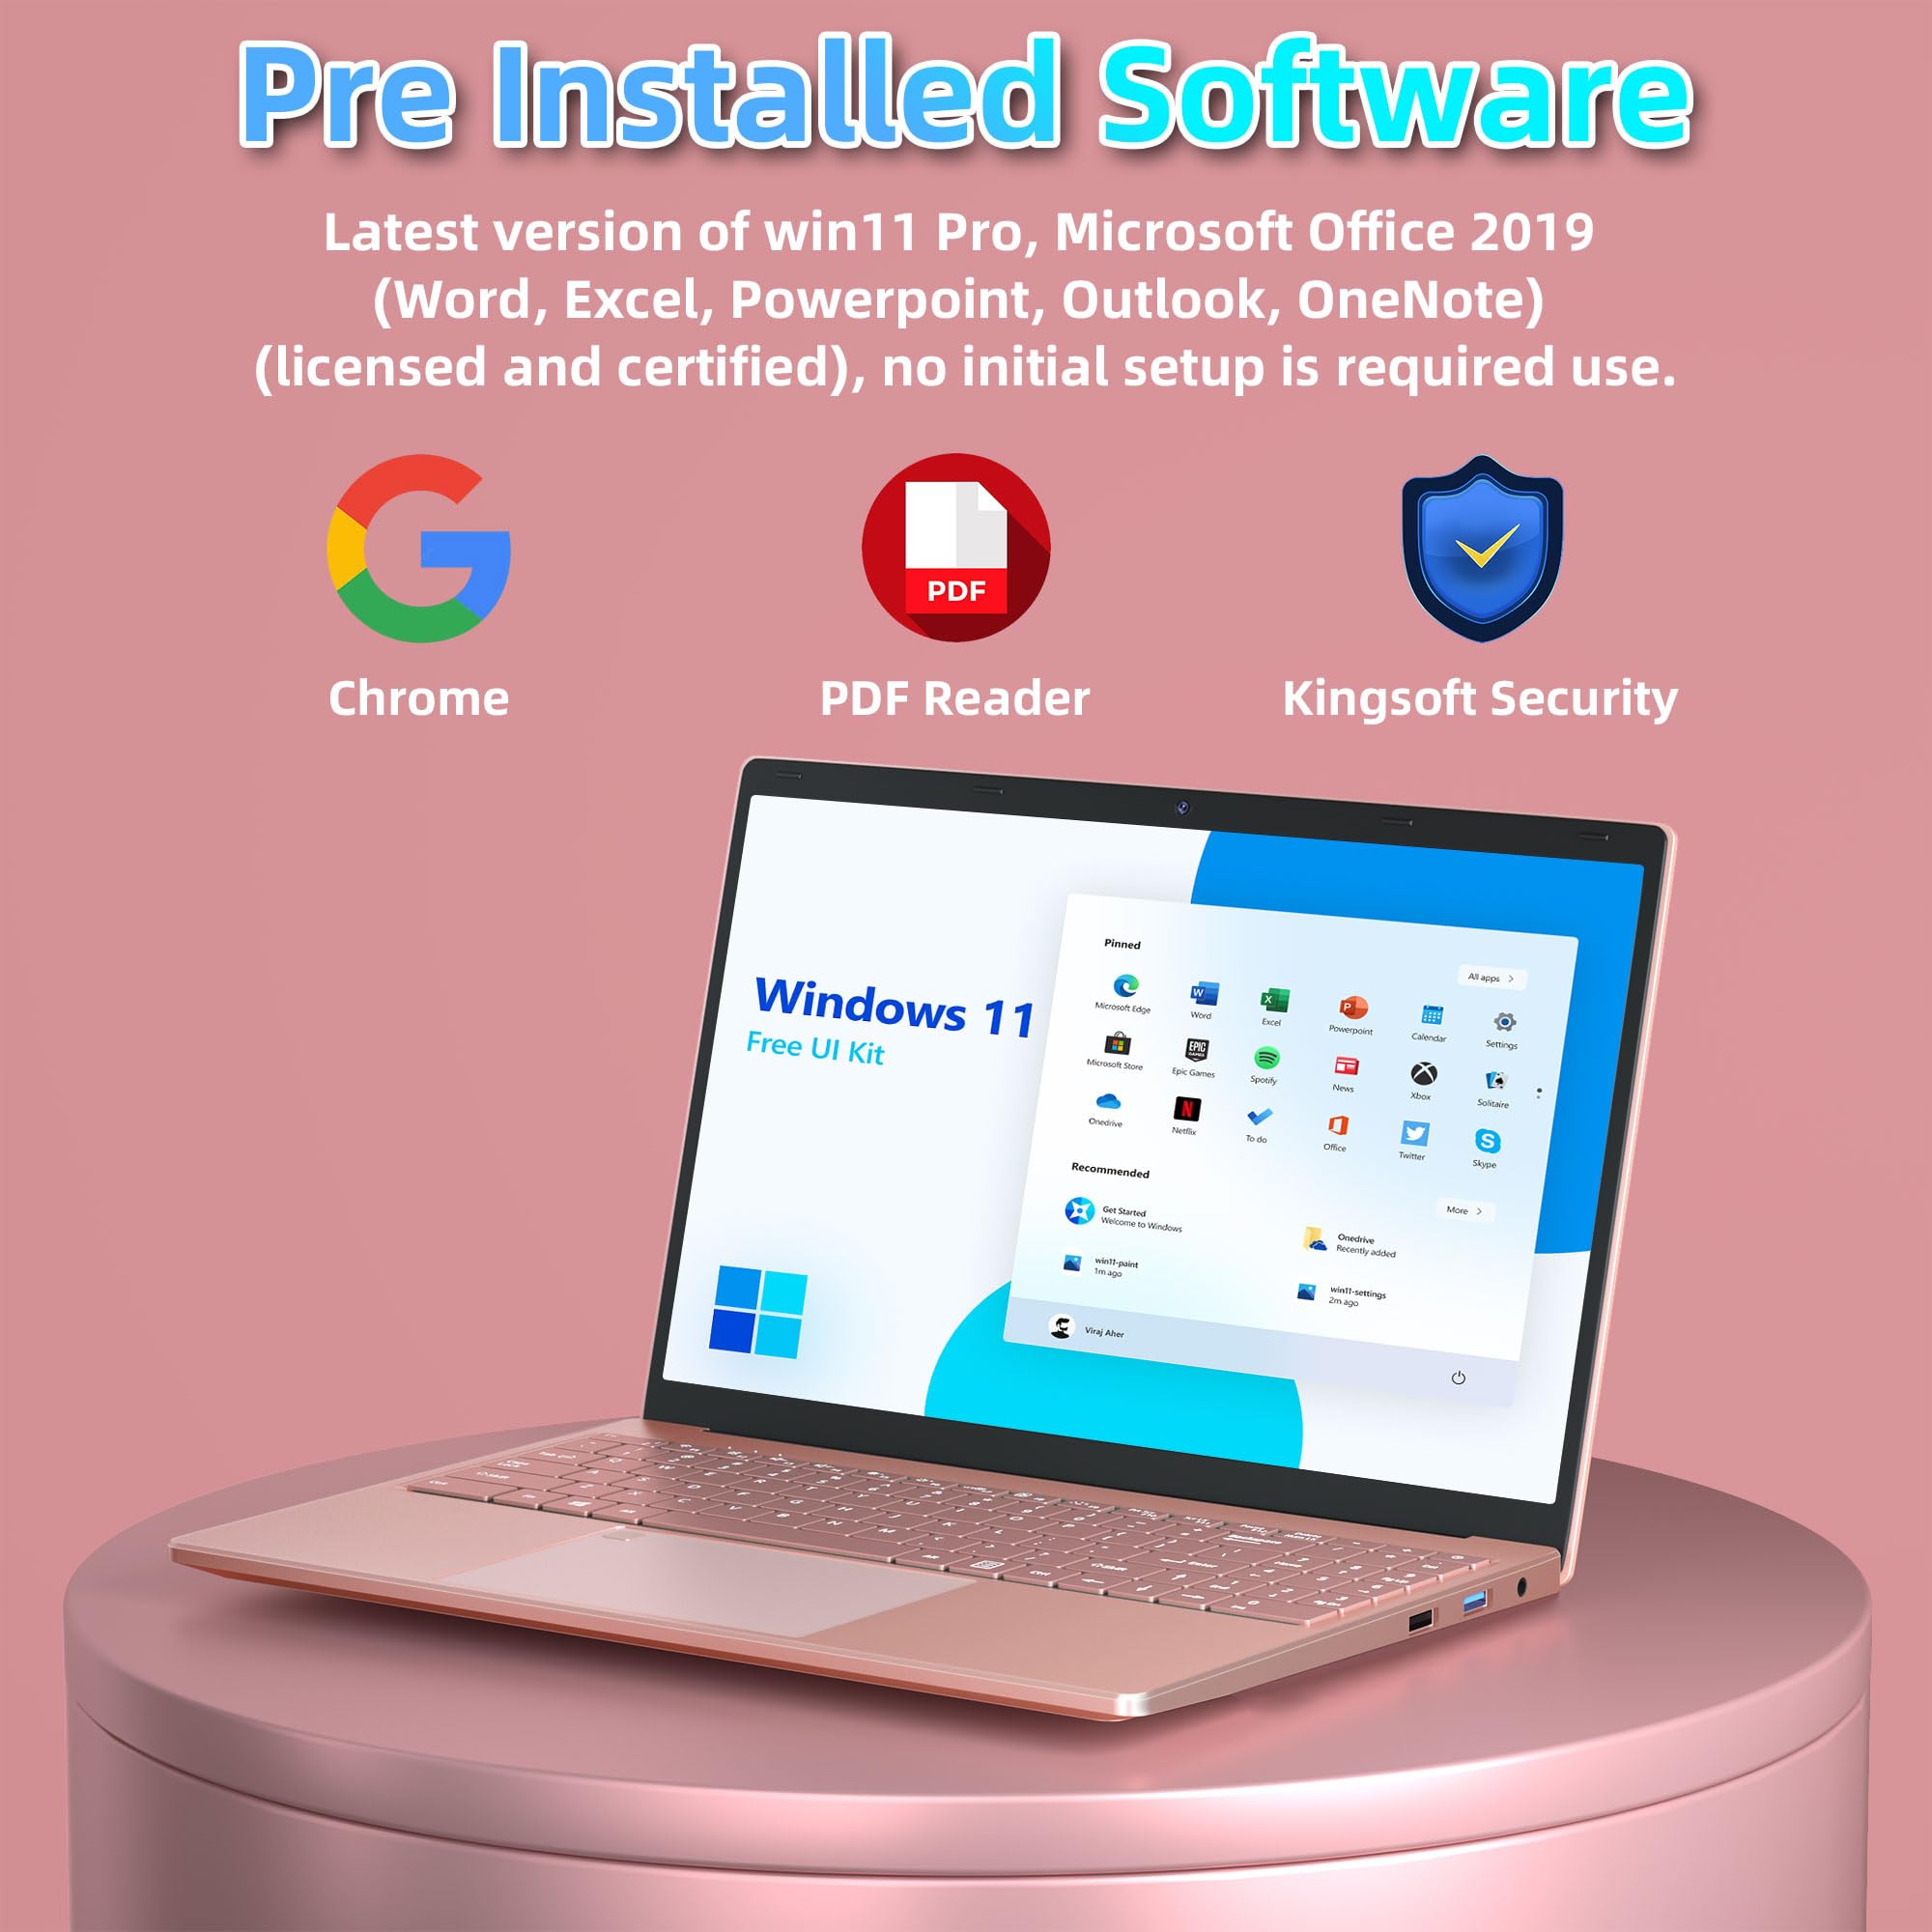 【Win 11 Pro/Office 2019】16 inch Laptop Narrow Bezels FHD (1920*1200) IPS Display, High Performance Celeron N5105 CPU, 16GB RAM, 512GB SSD, with Full Size Numeric Backlit KB, Rose gold (16G+512G SSD)